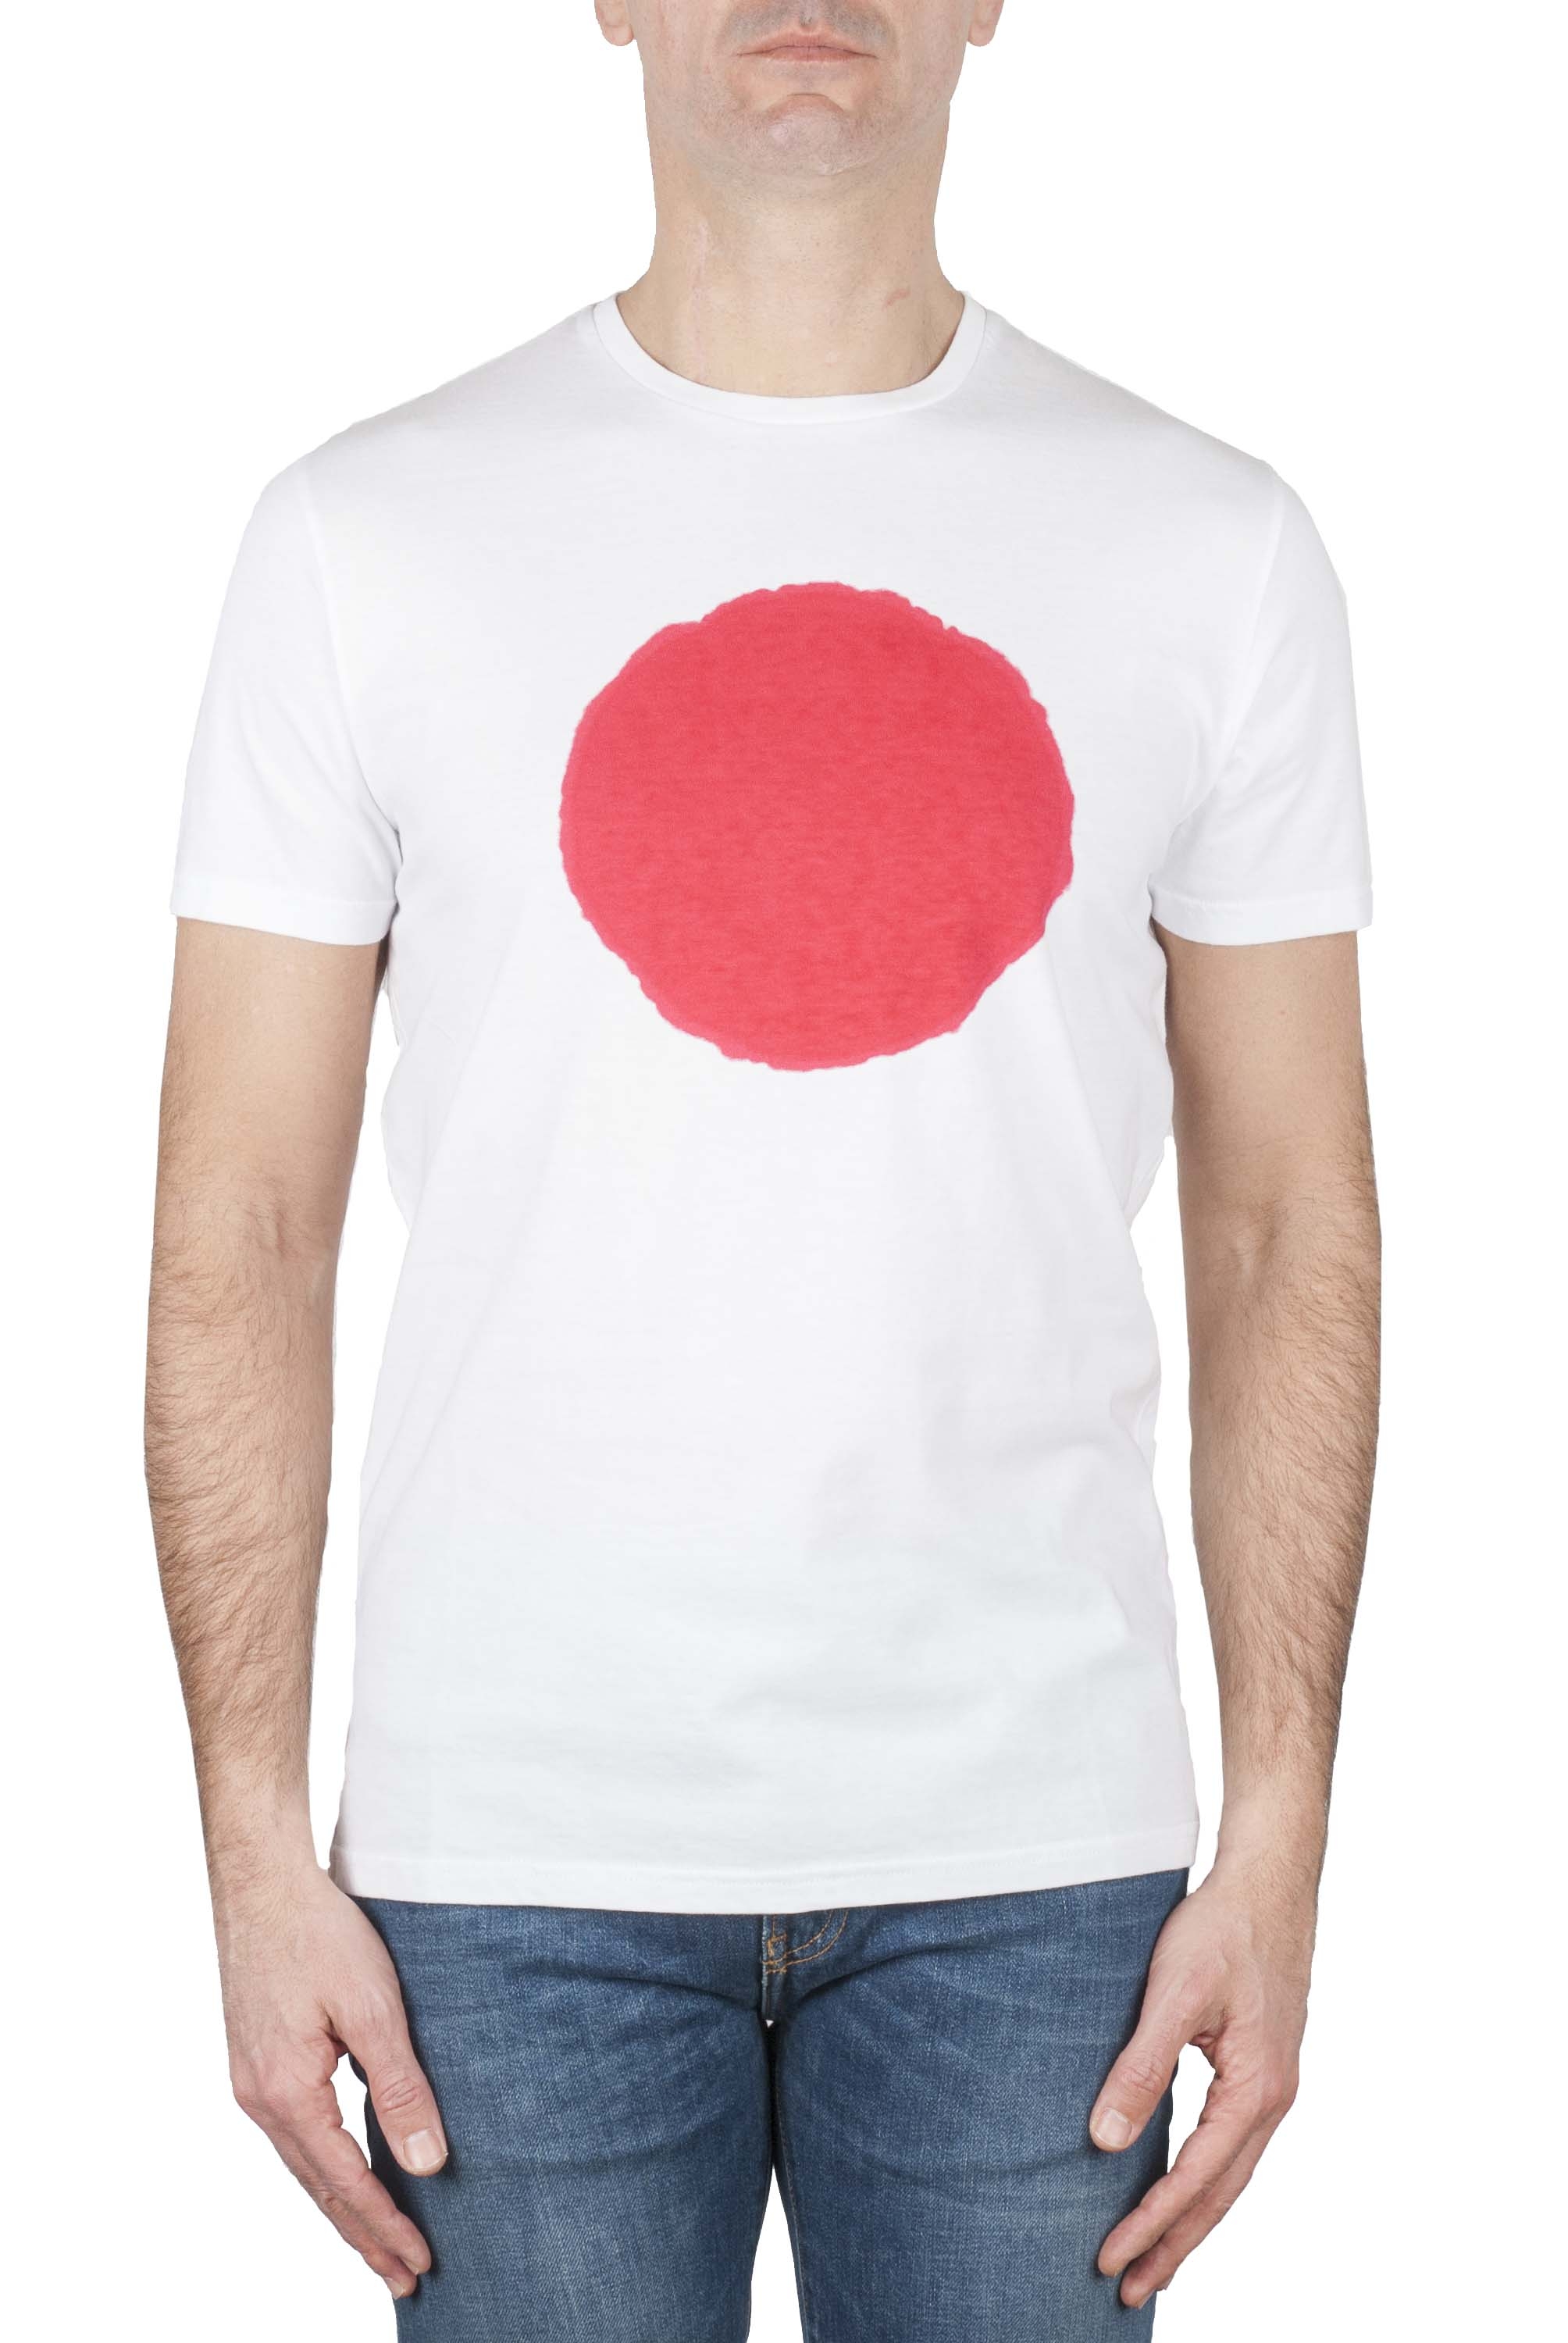 SBU 01170 Classic short sleeve cotton round neck t-shirt red and white printed graphic 01